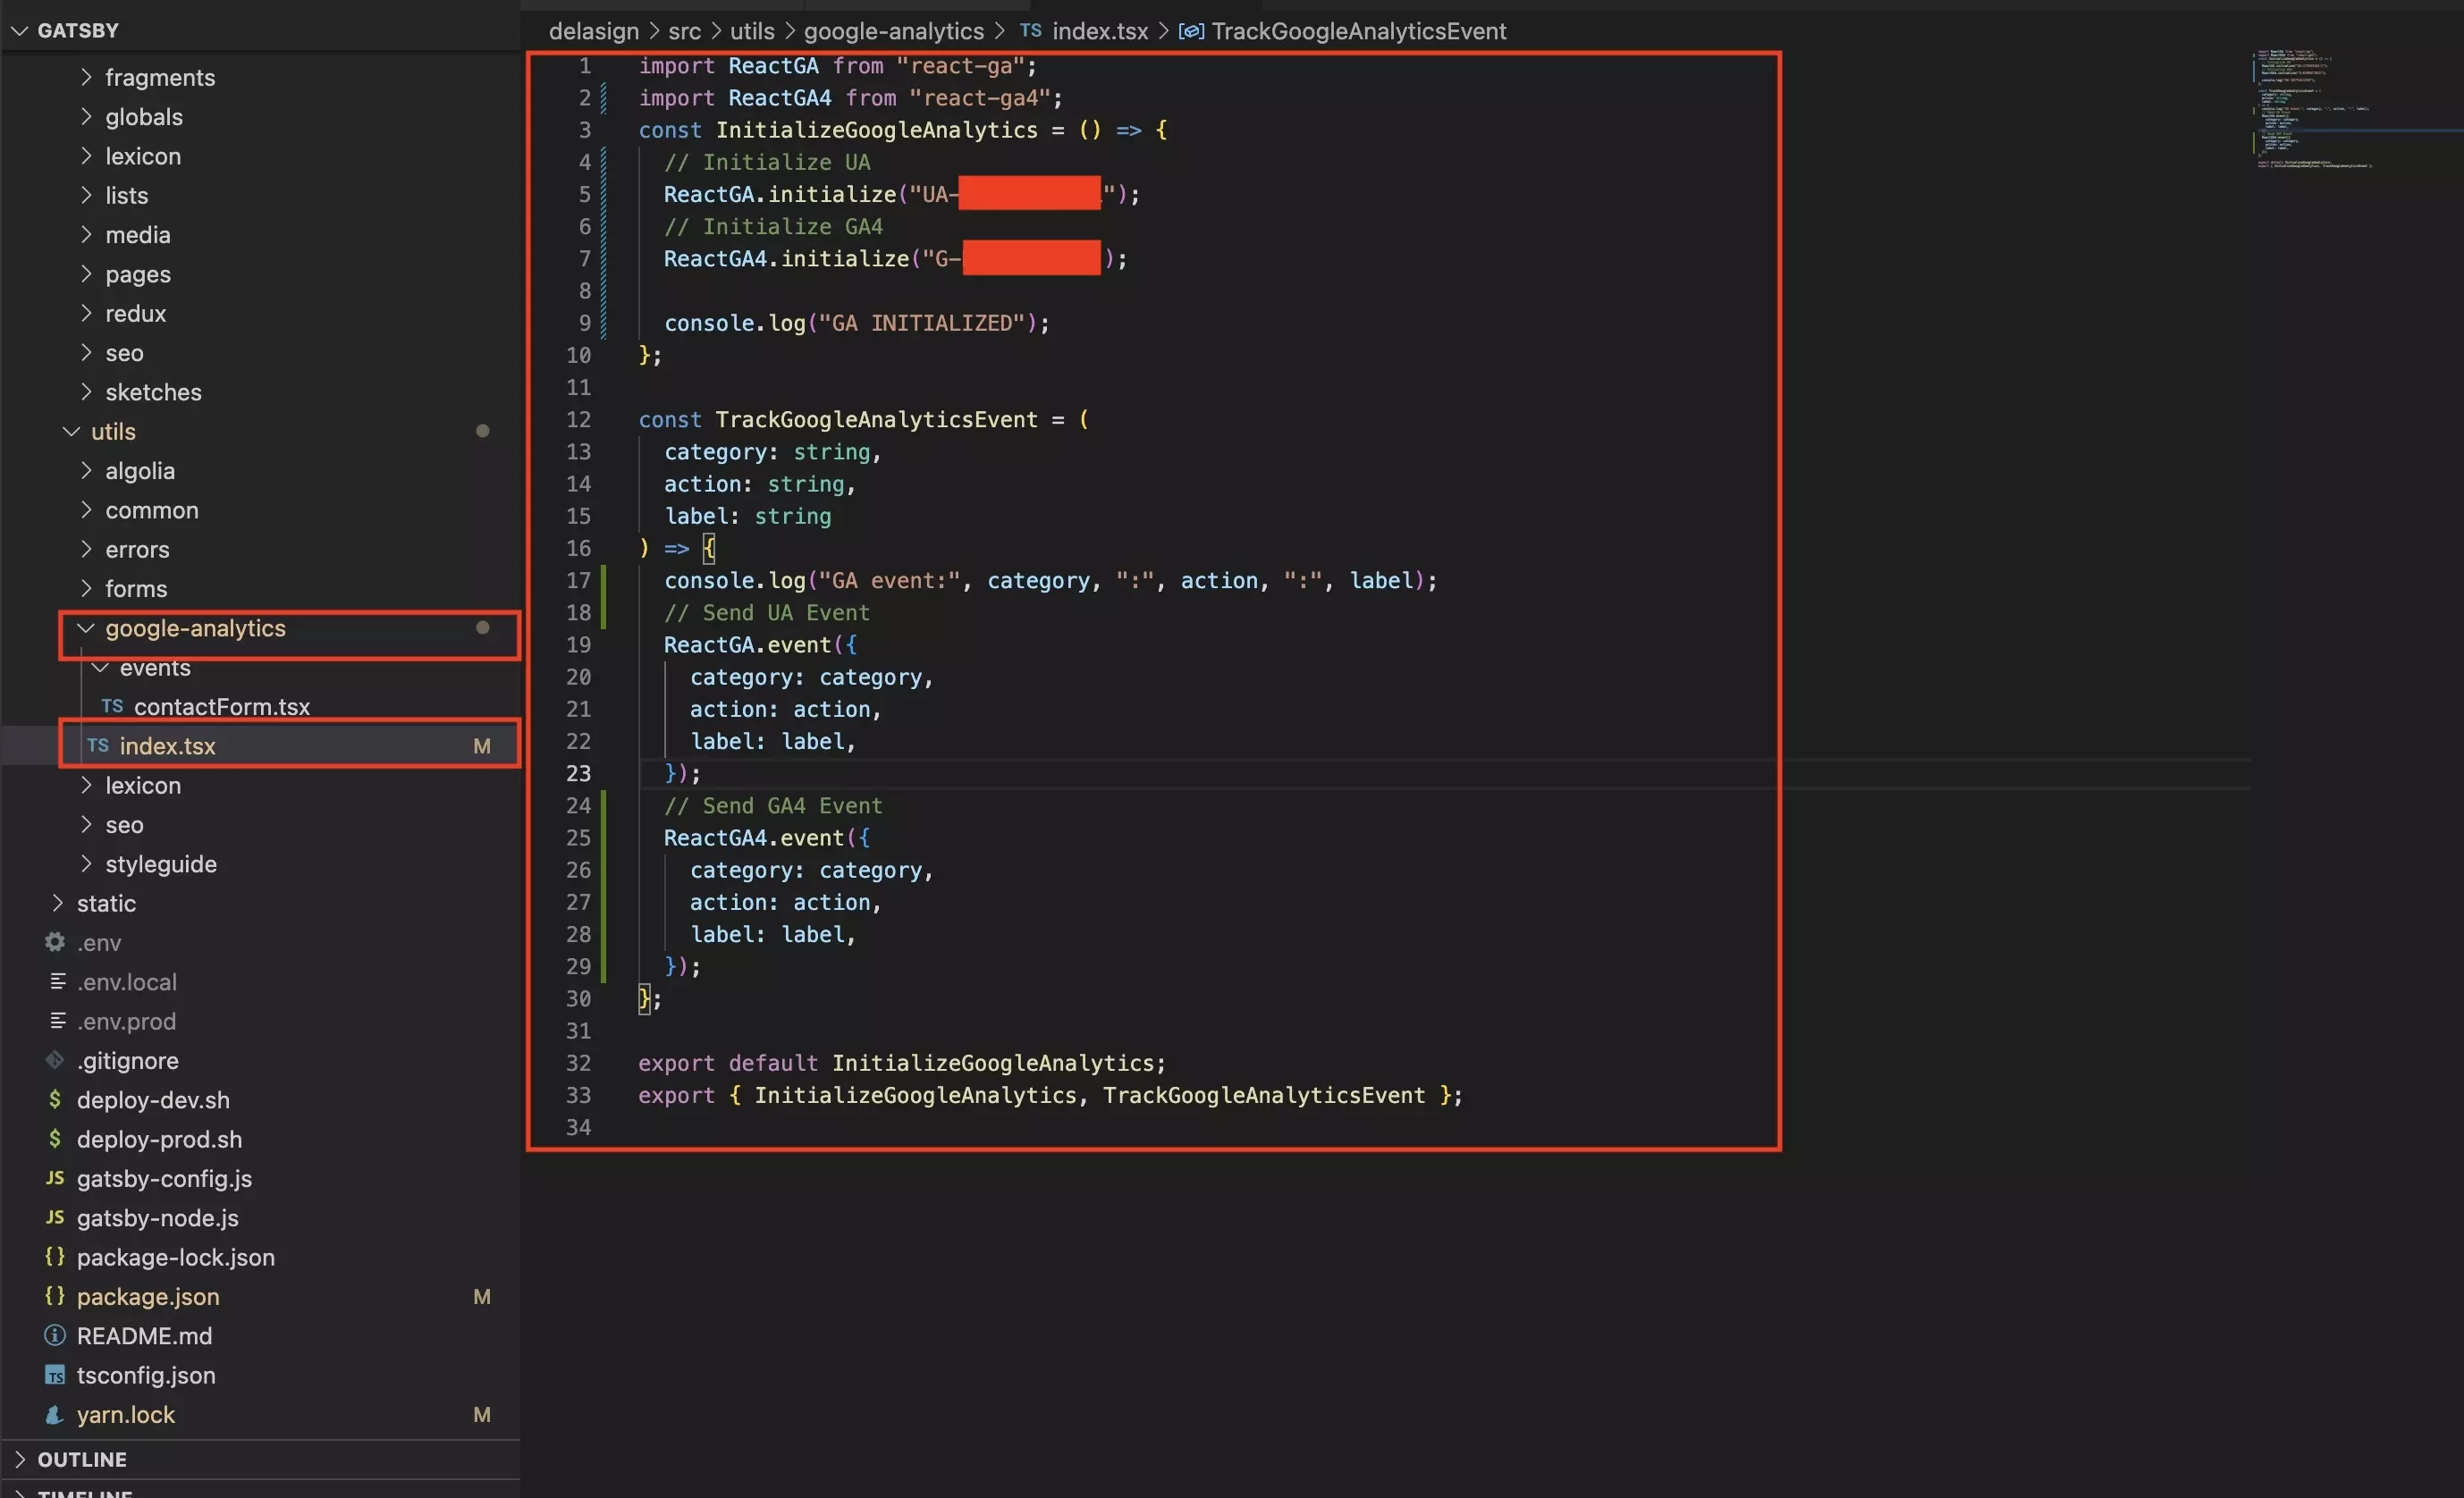 A screenshot of VSCode showing the functionality that we created for the Google Analytics to work.